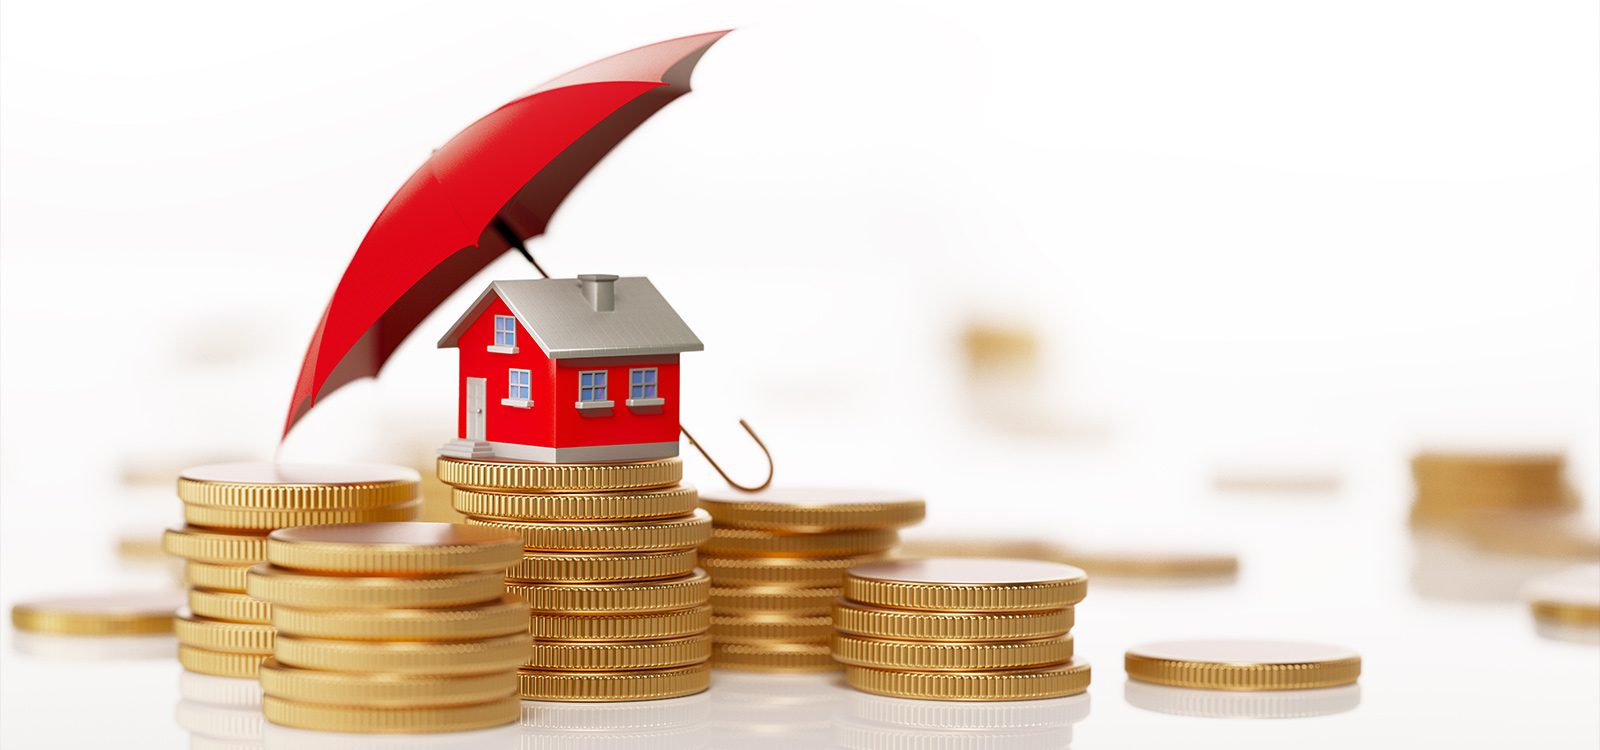 The state of property insurance affordability